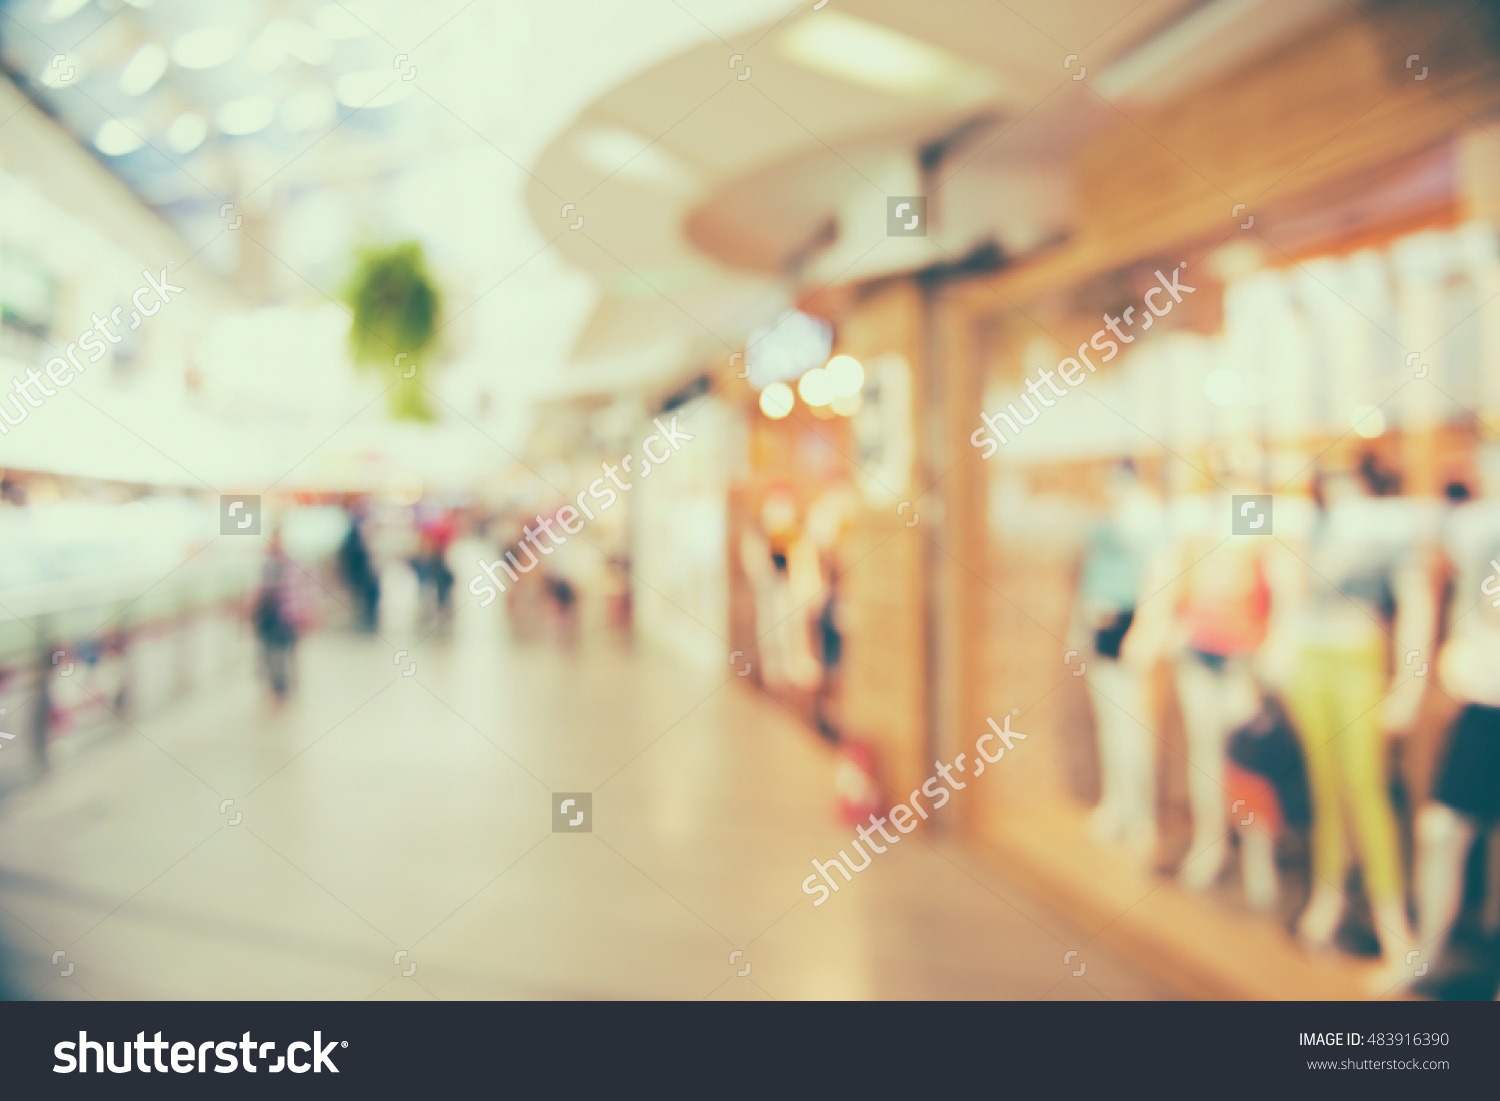 stock-photo-abstract-background-of-shopping-mall-shallow-depth-of-focus-483916390